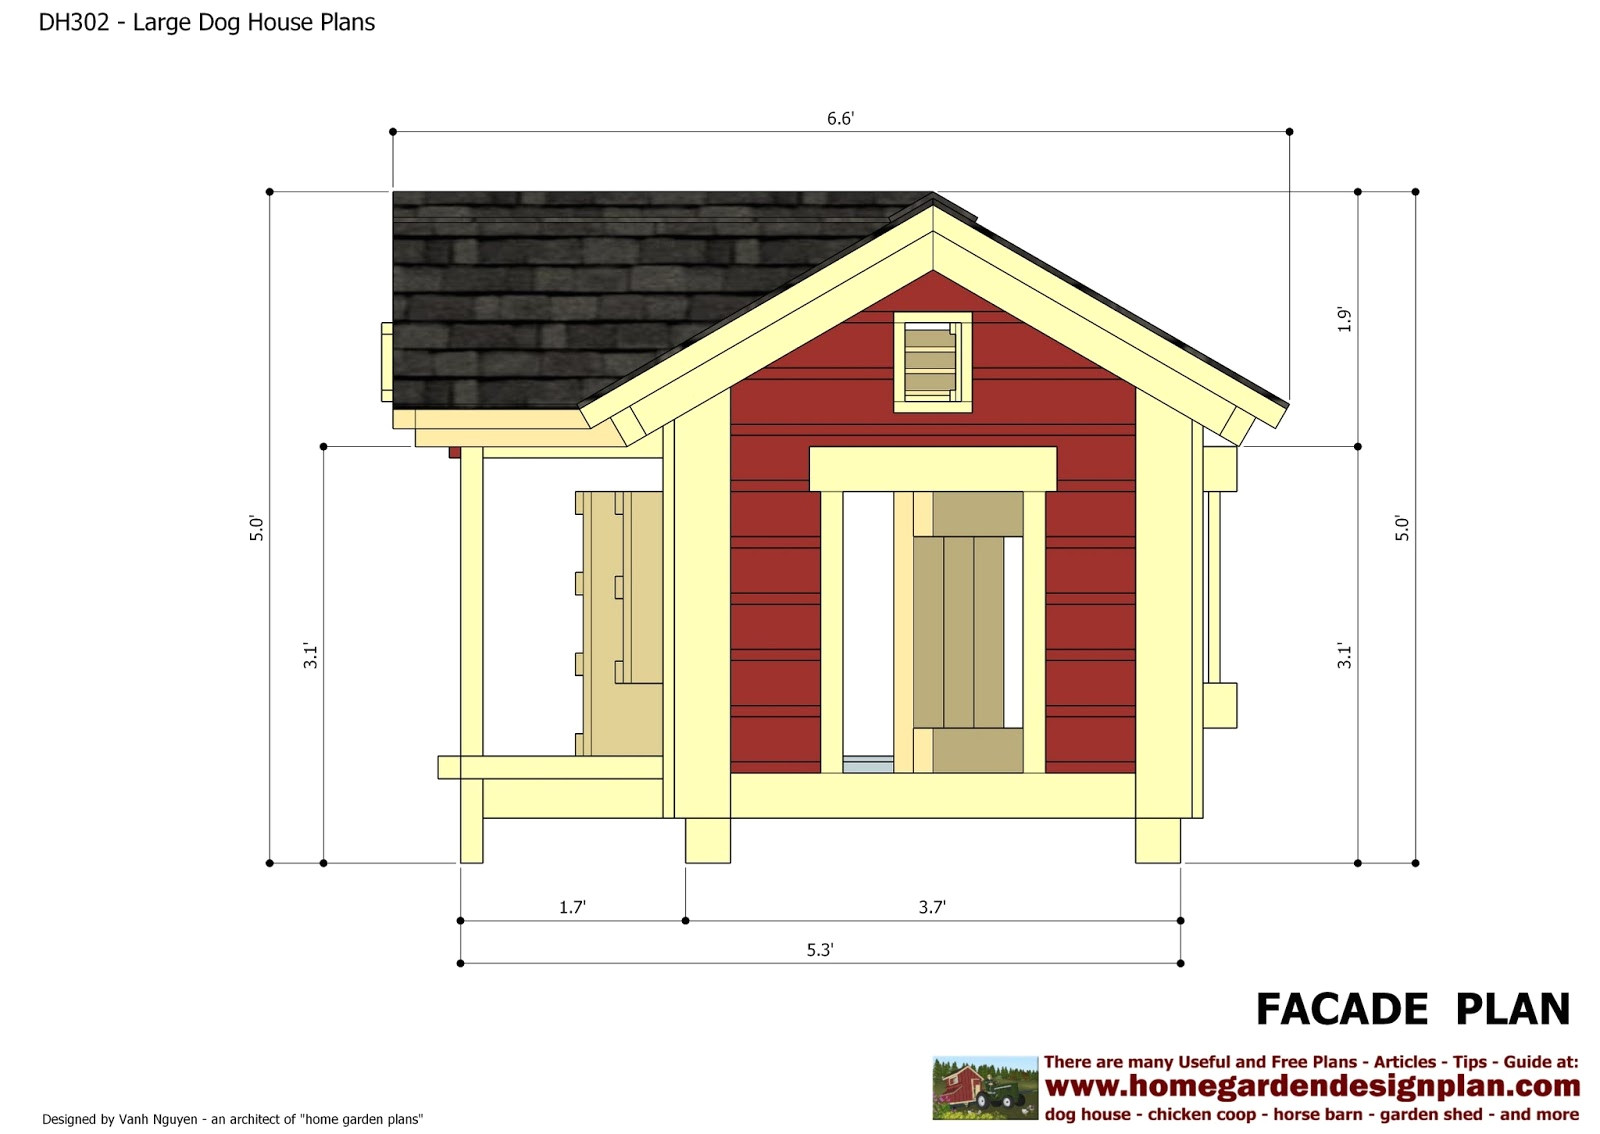 insulated dog house plans for large dogs free